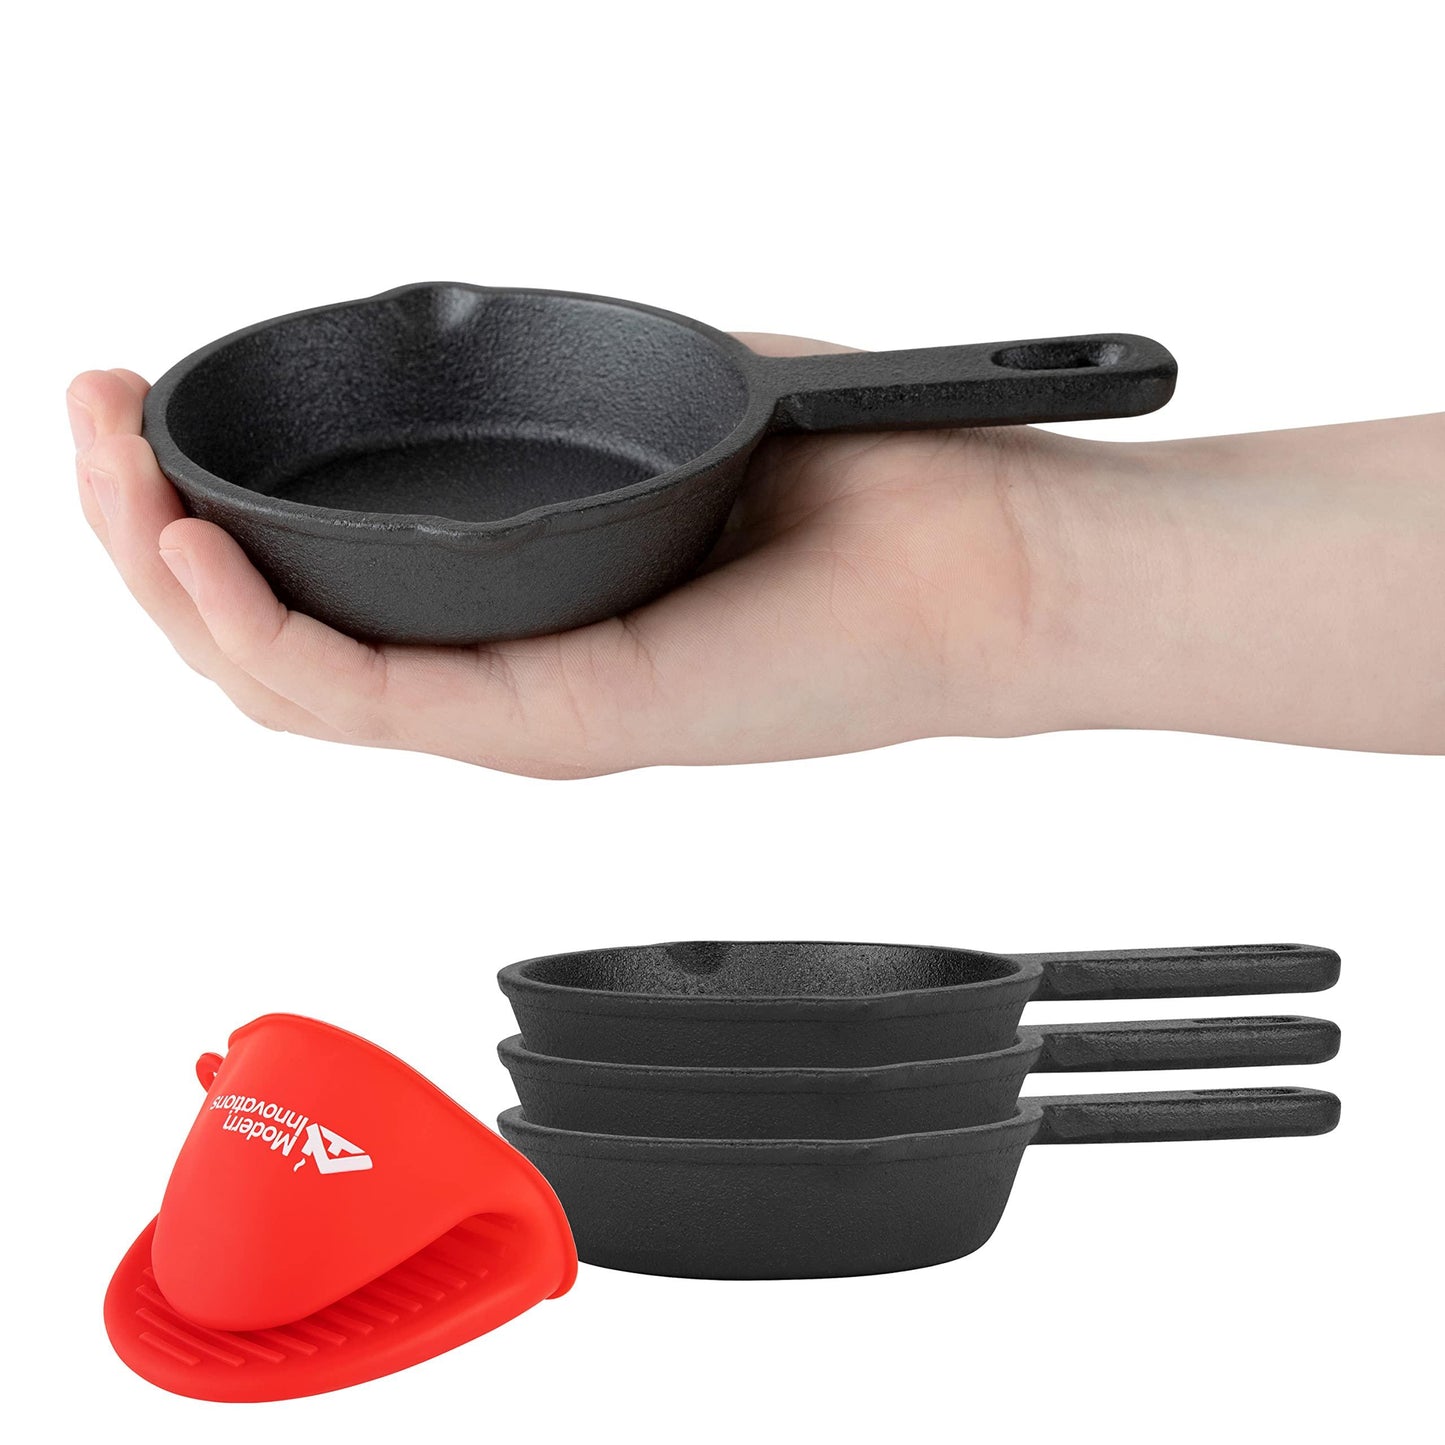 Modern Innovations Mini Black Cast Iron Skillet Set with Silicone Mitt (4 Count) - 3.5 Inch Pans, Pre Seasoned Small Skillets for Baked Cookie/Brownie or Cooked Eggs - CookCave